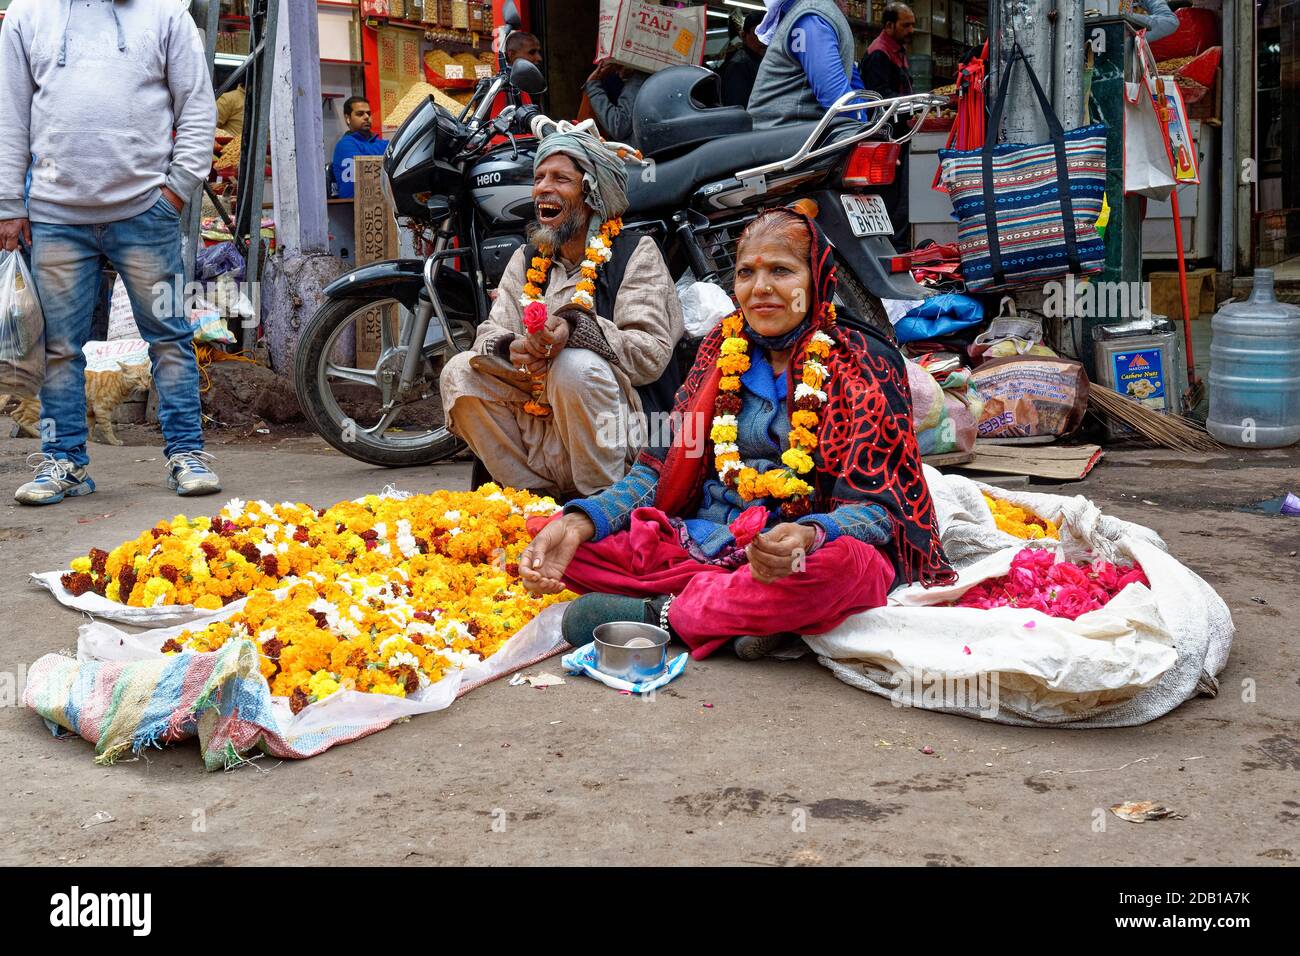 Chandni Chowk bazaar, one of the oldest market places in Old Delhi, India Stock Photo